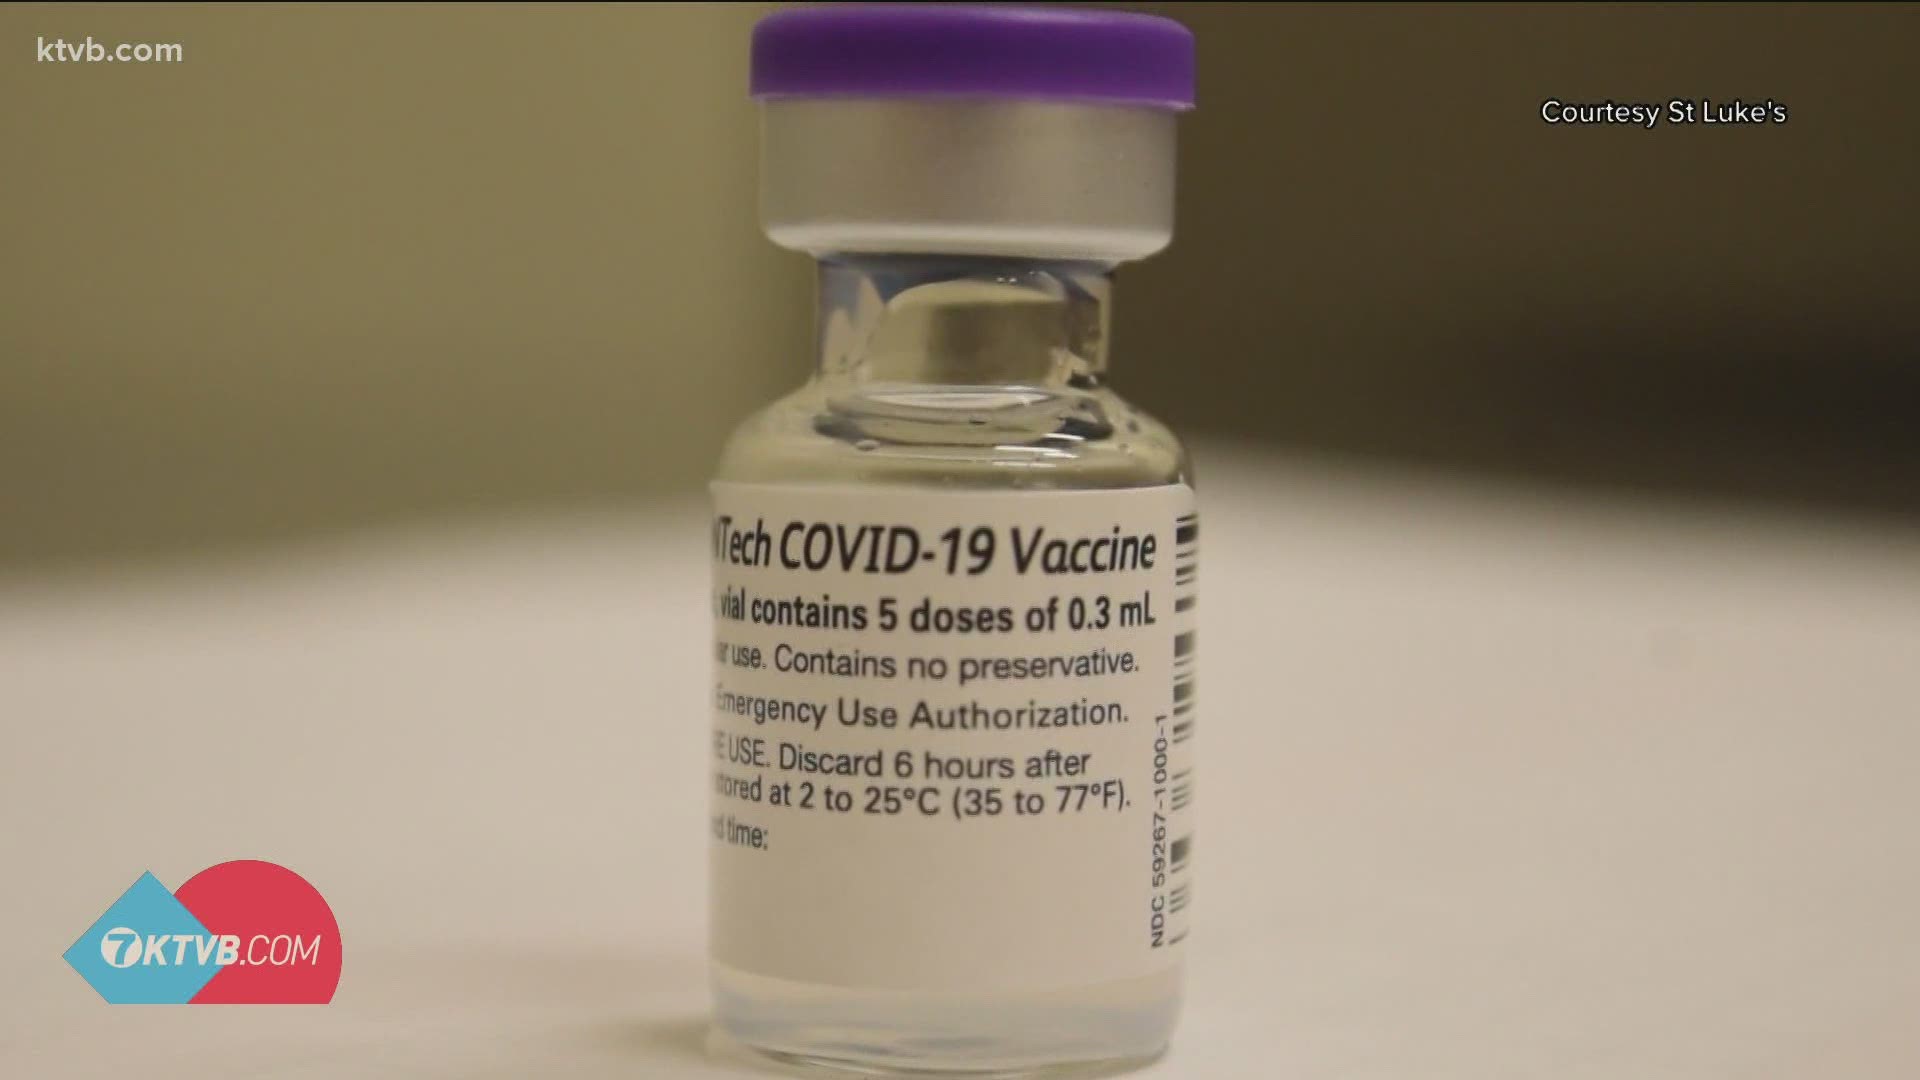 Supply and demand for the vaccine don't seem to be keep up with each other. We turned to the chair of the governor's COVID advisory committee for answers.